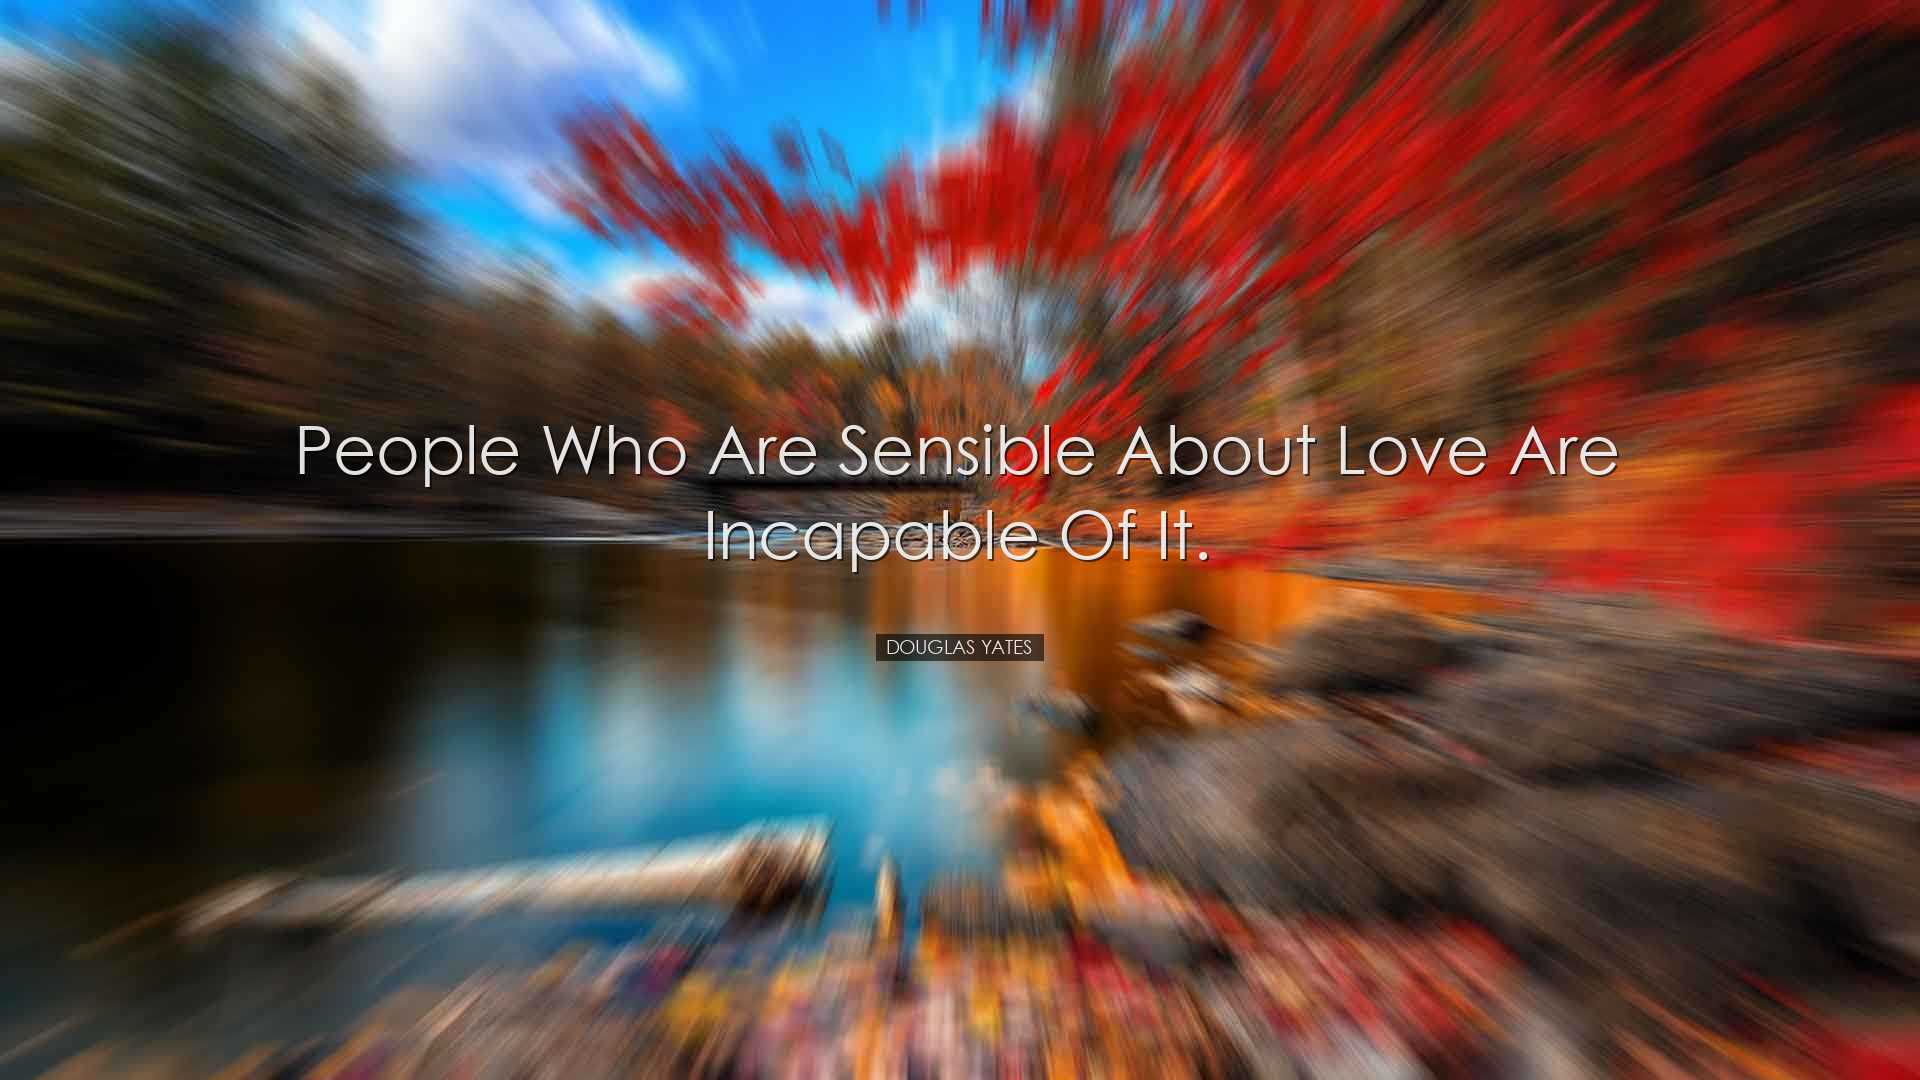 People who are sensible about love are incapable of it. - Douglas